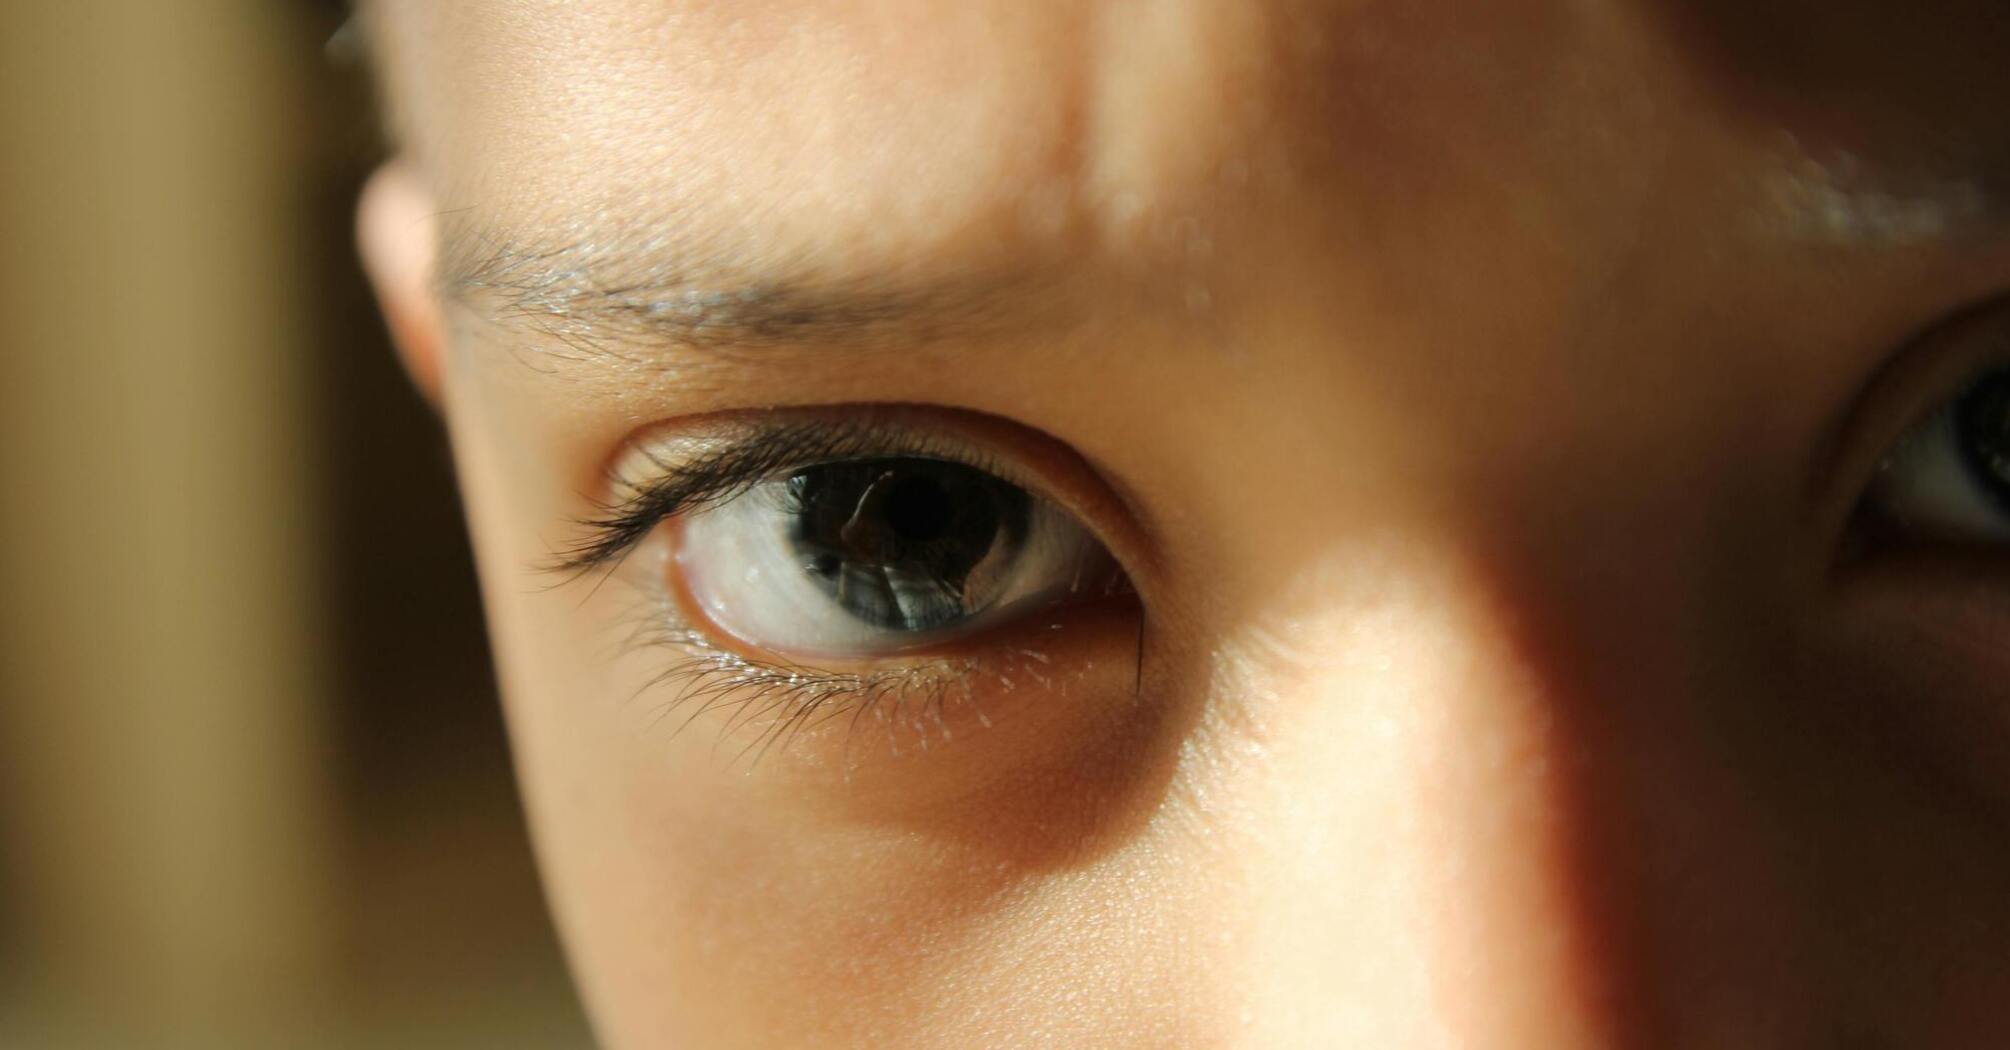 5 fascinating facts about eyes and vision